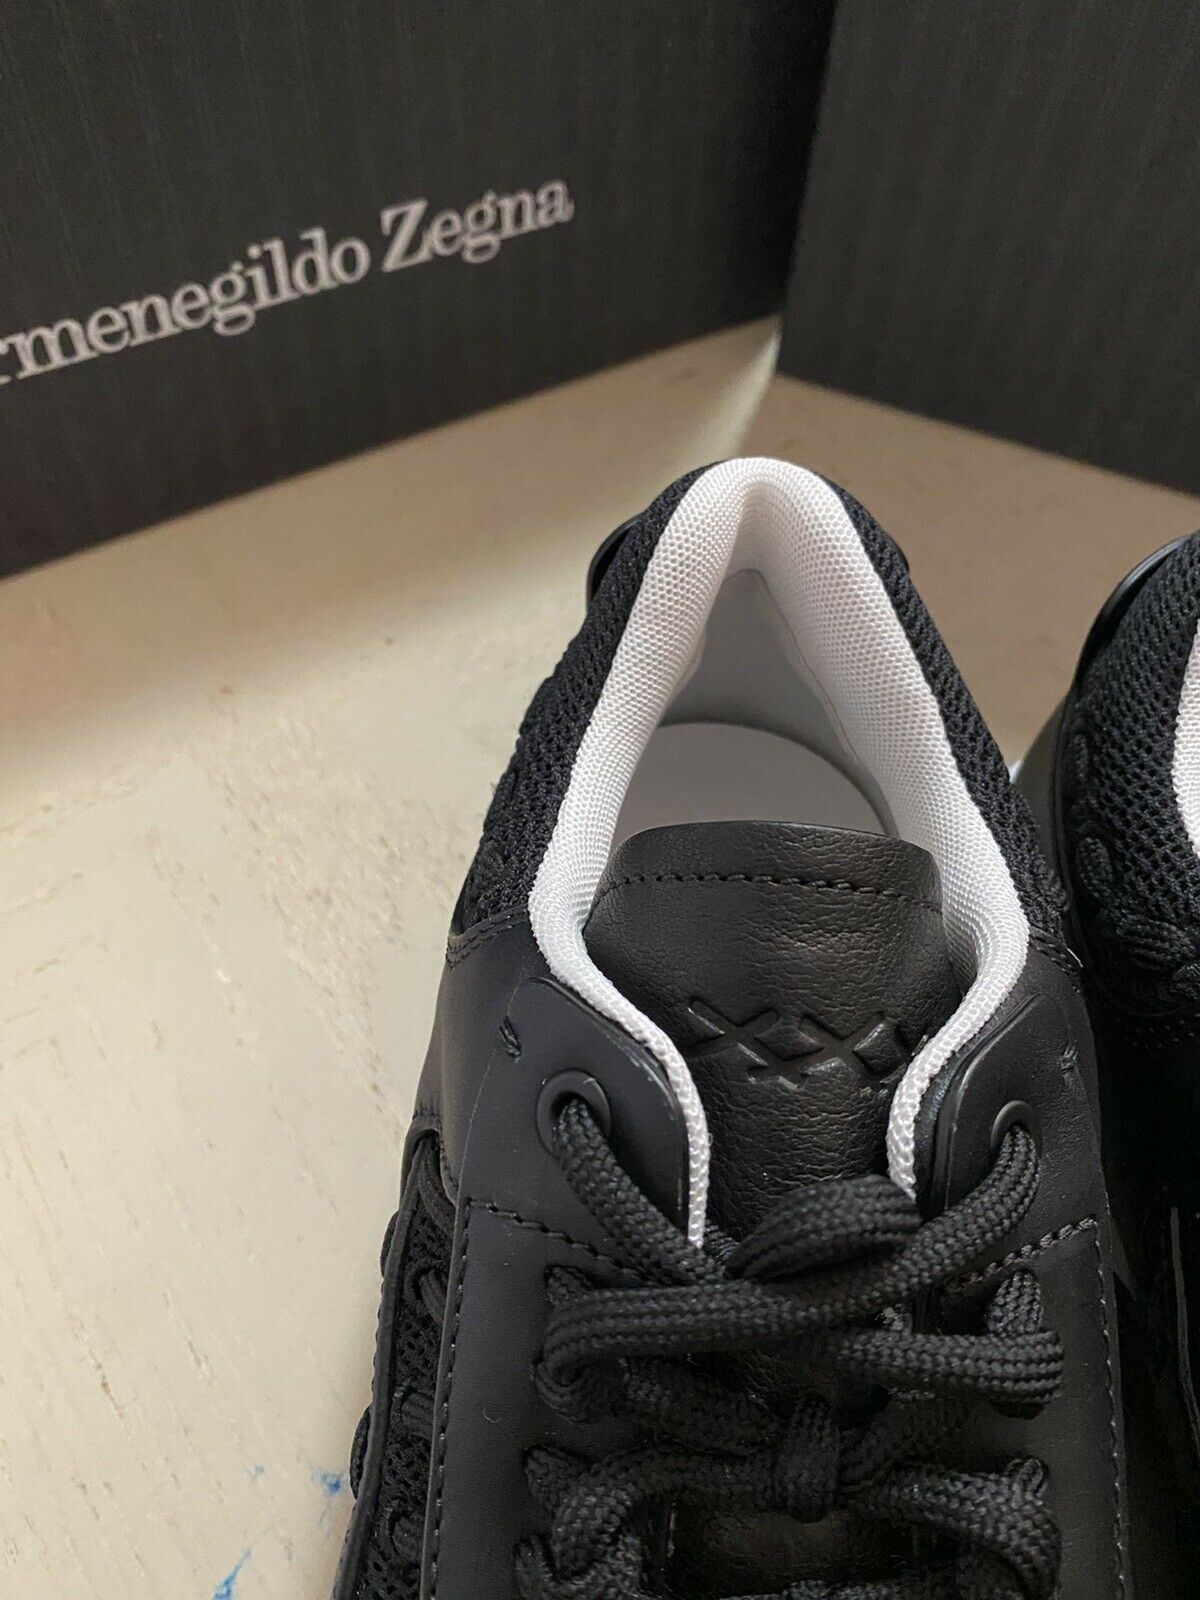 New $795 Ermenegildo Zegna Couture Leather Sneakers Shoes Black 10 US Italy